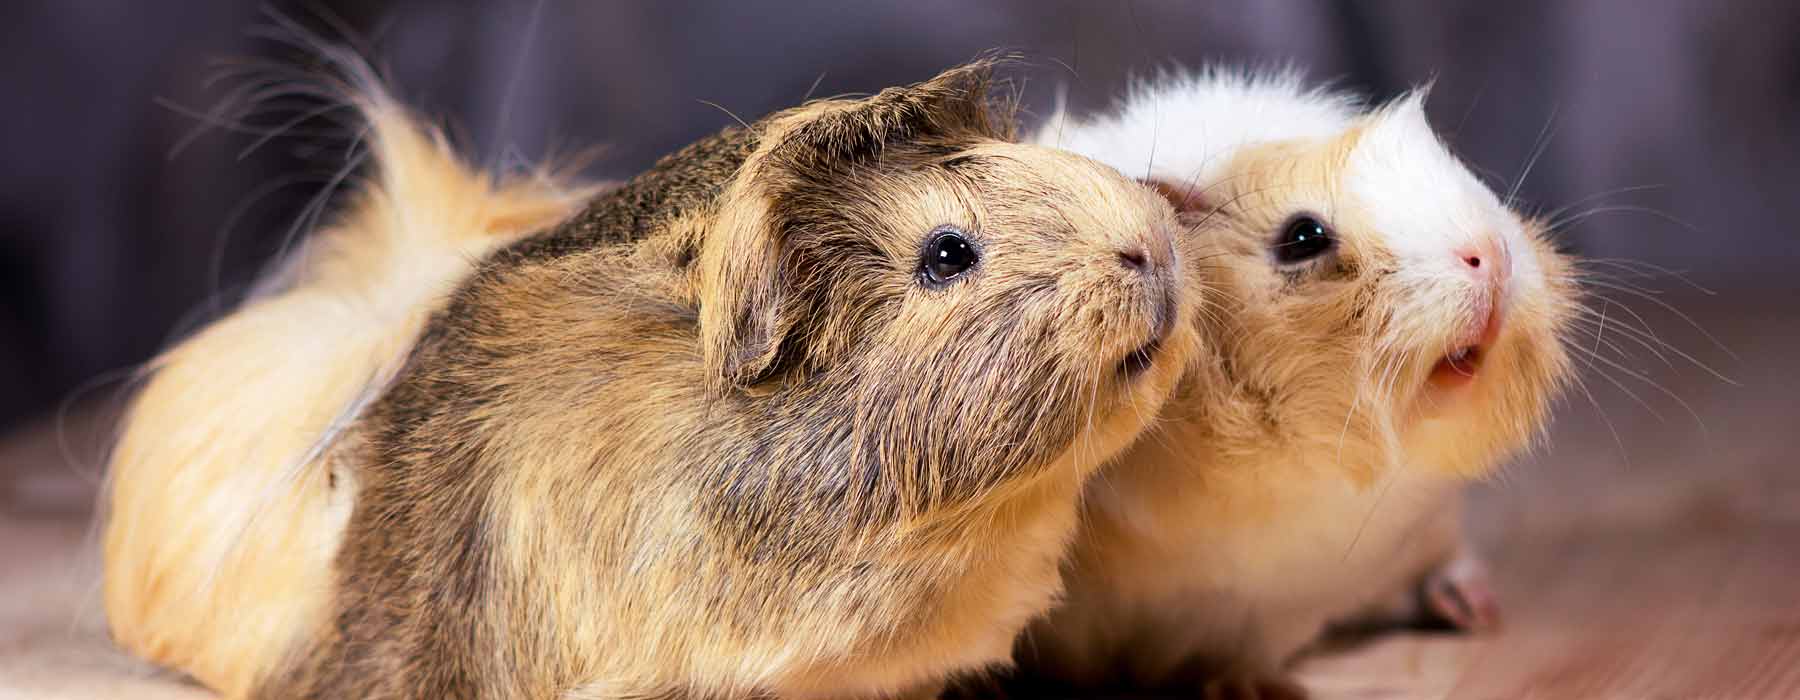 two guinea pigs side by side